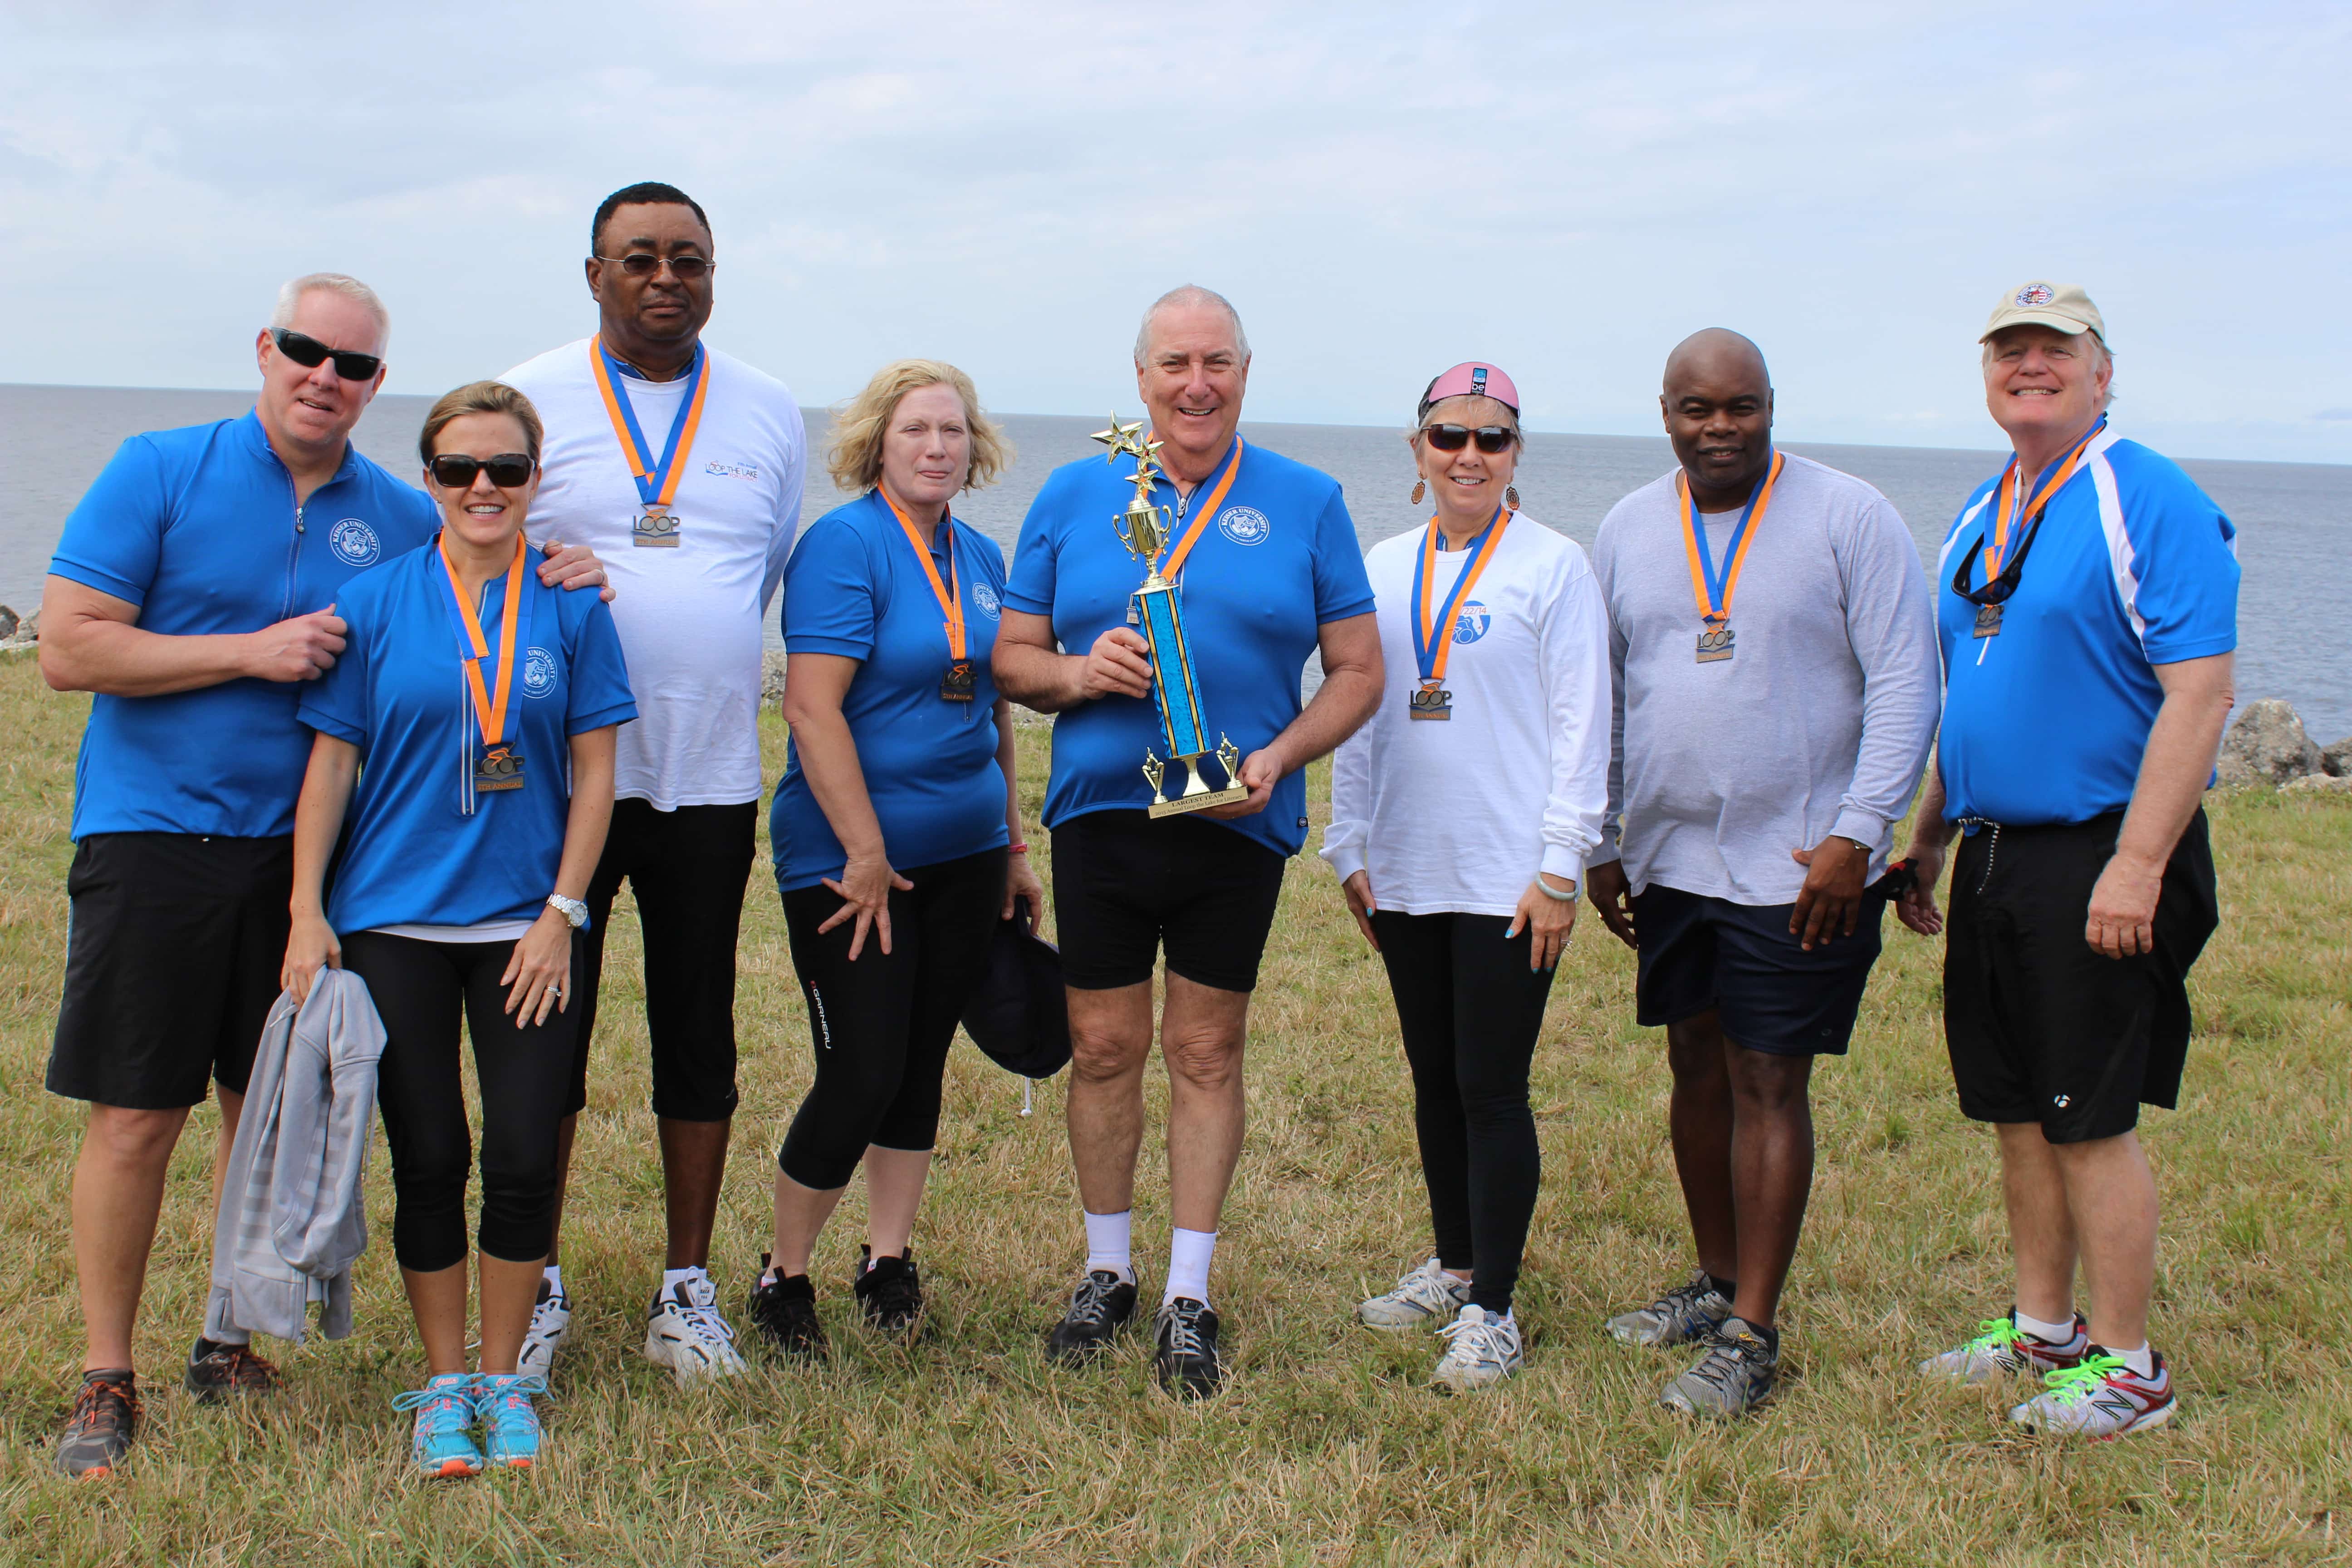 Keiser University’s Graduate School Participated in “Loop the Lake for Literacy” and Raised $3,000